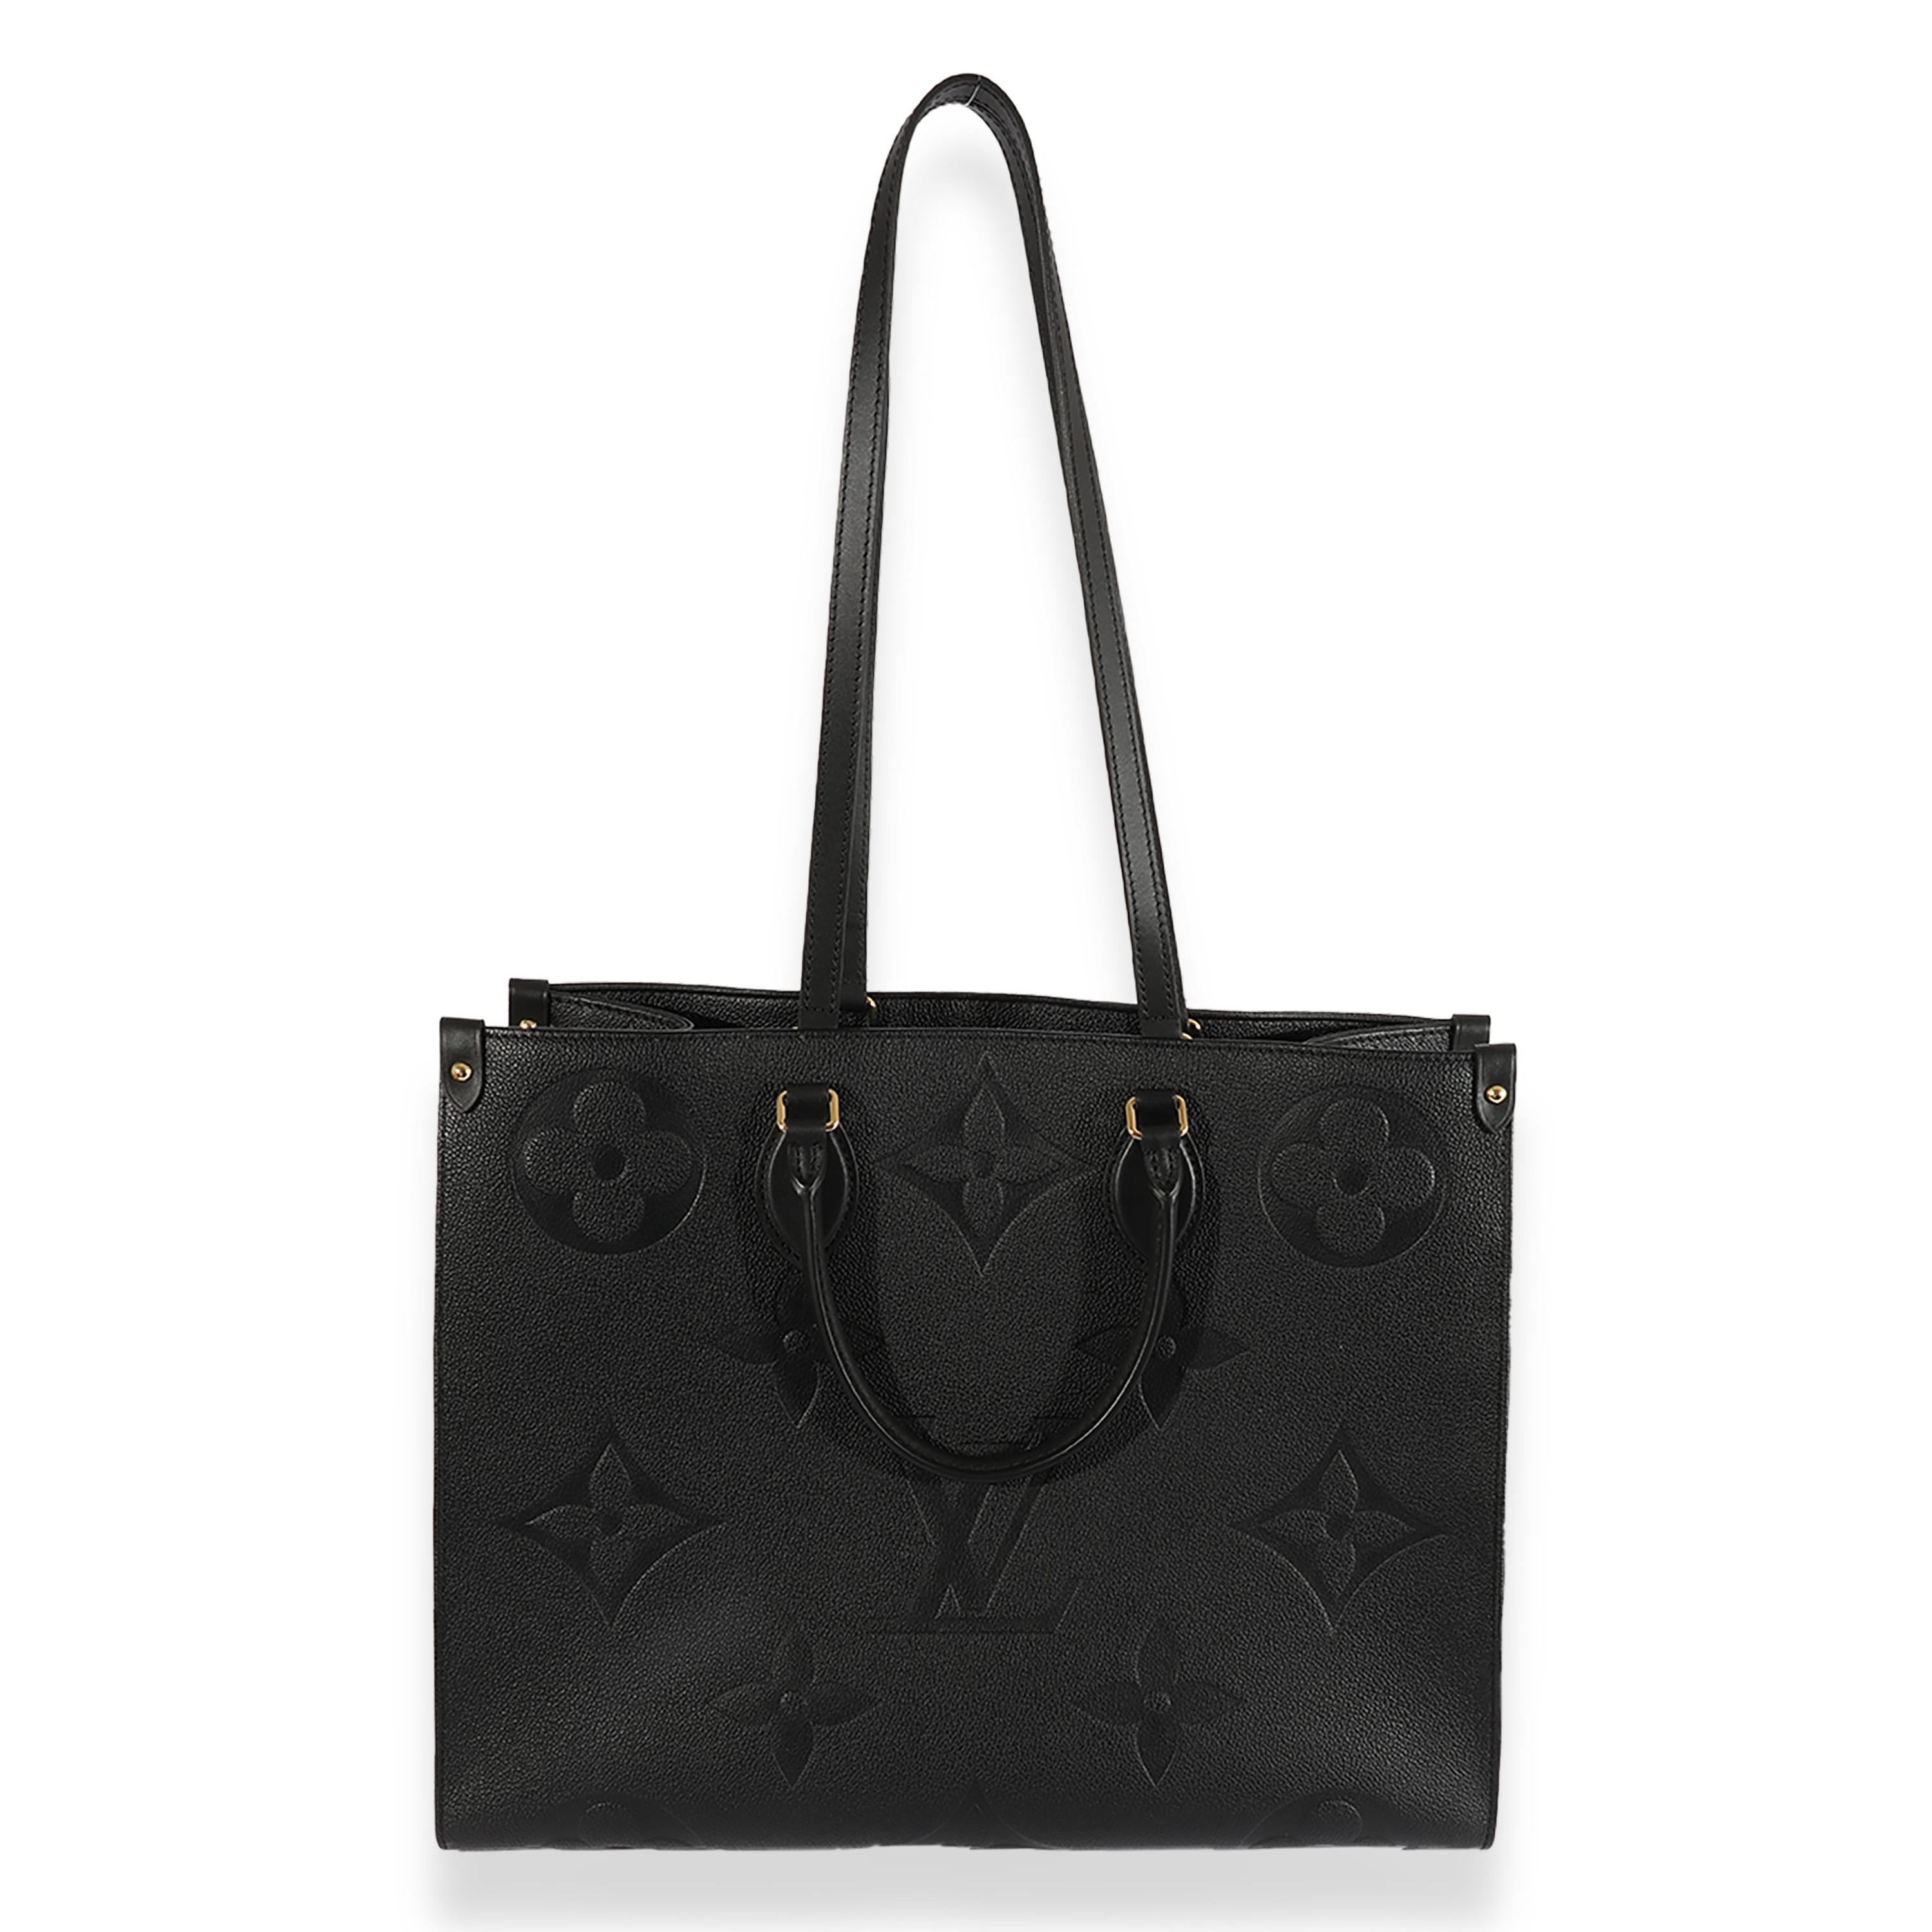 Listing Title: Louis Vuitton Black Monogram Empreinte Onthego GM
SKU: 124254
MSRP: 3500.00
Condition: Pre-owned 
Handbag Condition: Mint
Condition Comments: Mint Condition. No visible signs of wear.  Final sale.
Brand: Louis Vuitton
Model: